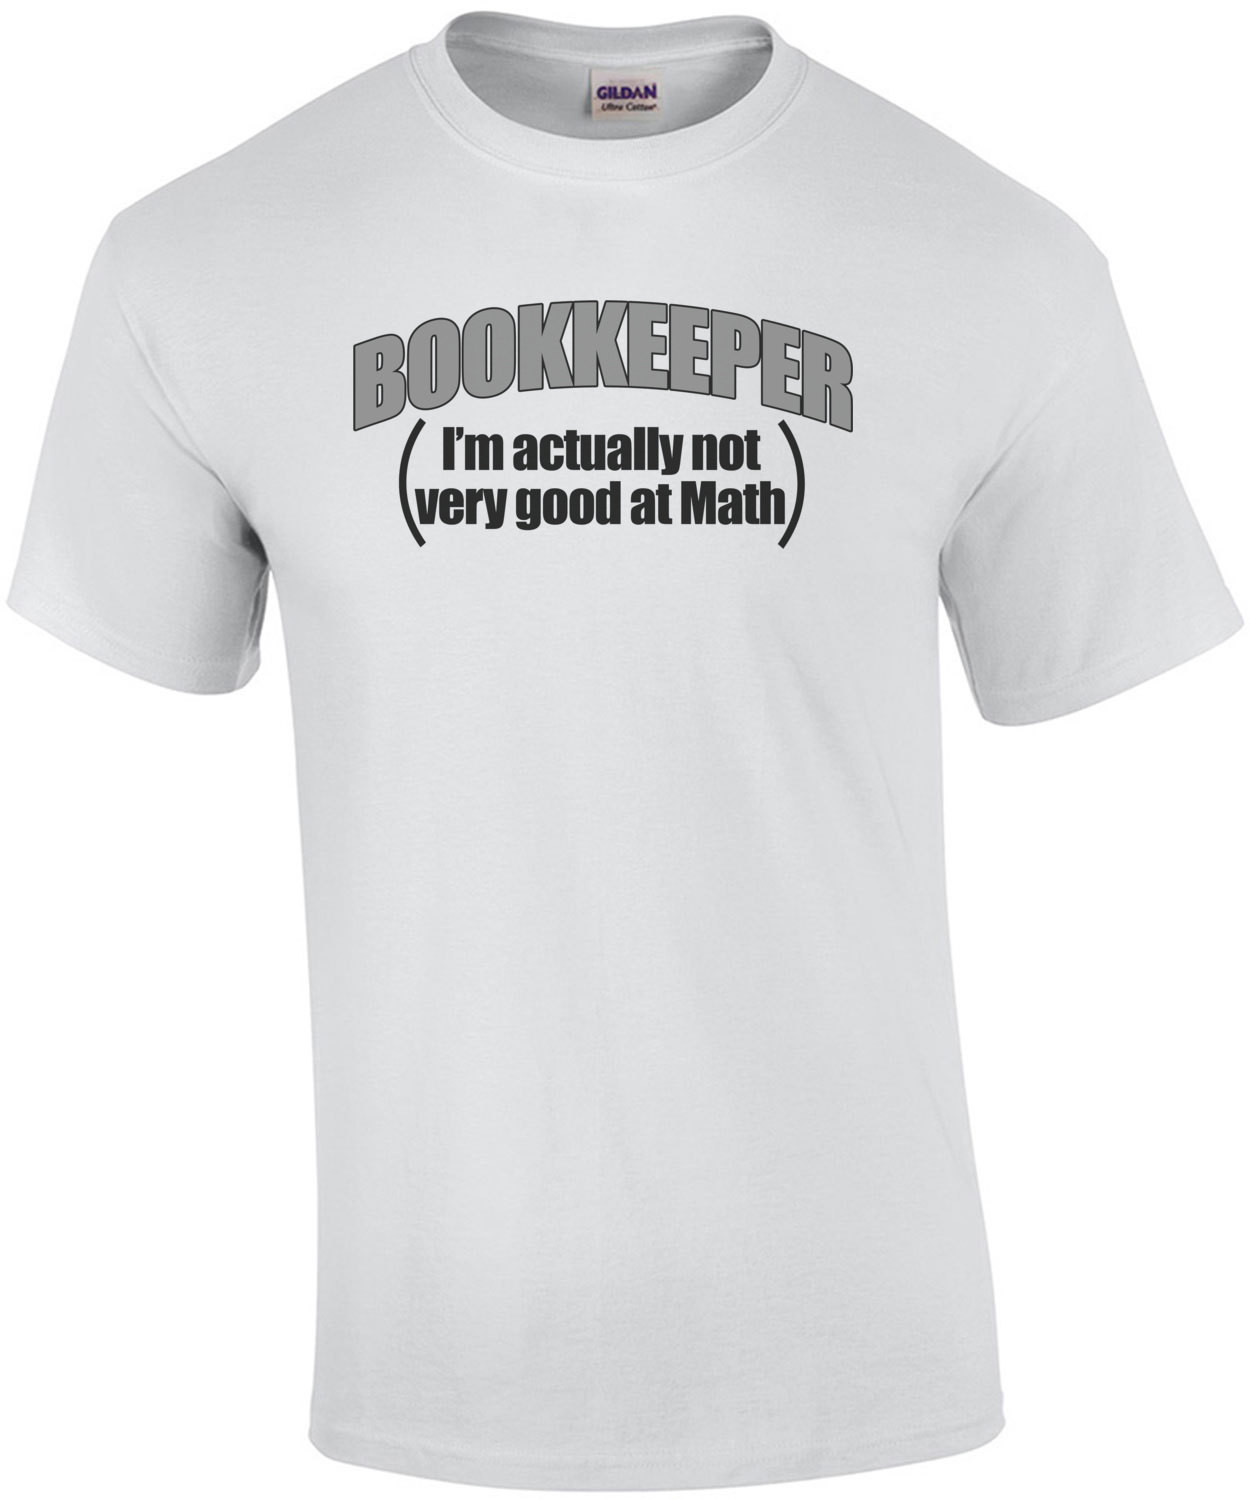 Bookkeeper I'm Actually Not Very Good At Math T-Shirt